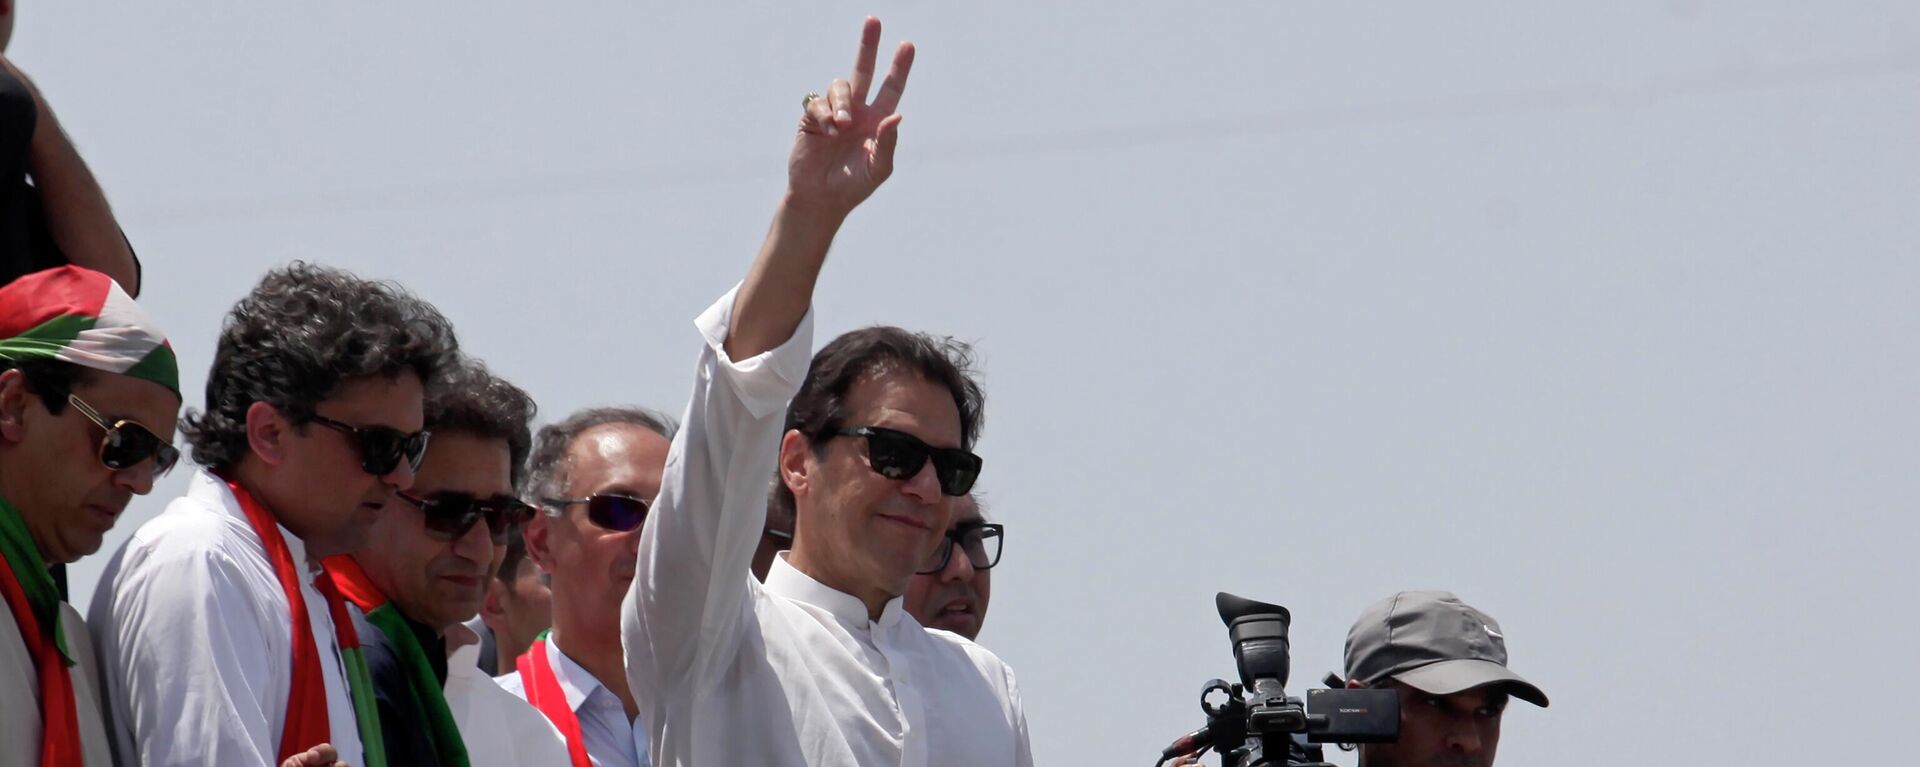 Ousted Pakistani Prime Minister Imran Khan gives the victory sign to supporters as he leads a march toward Islamabad, in Swabi, Pakistan, Wednesday, May 25, 2022. - Sputnik International, 1920, 24.11.2022